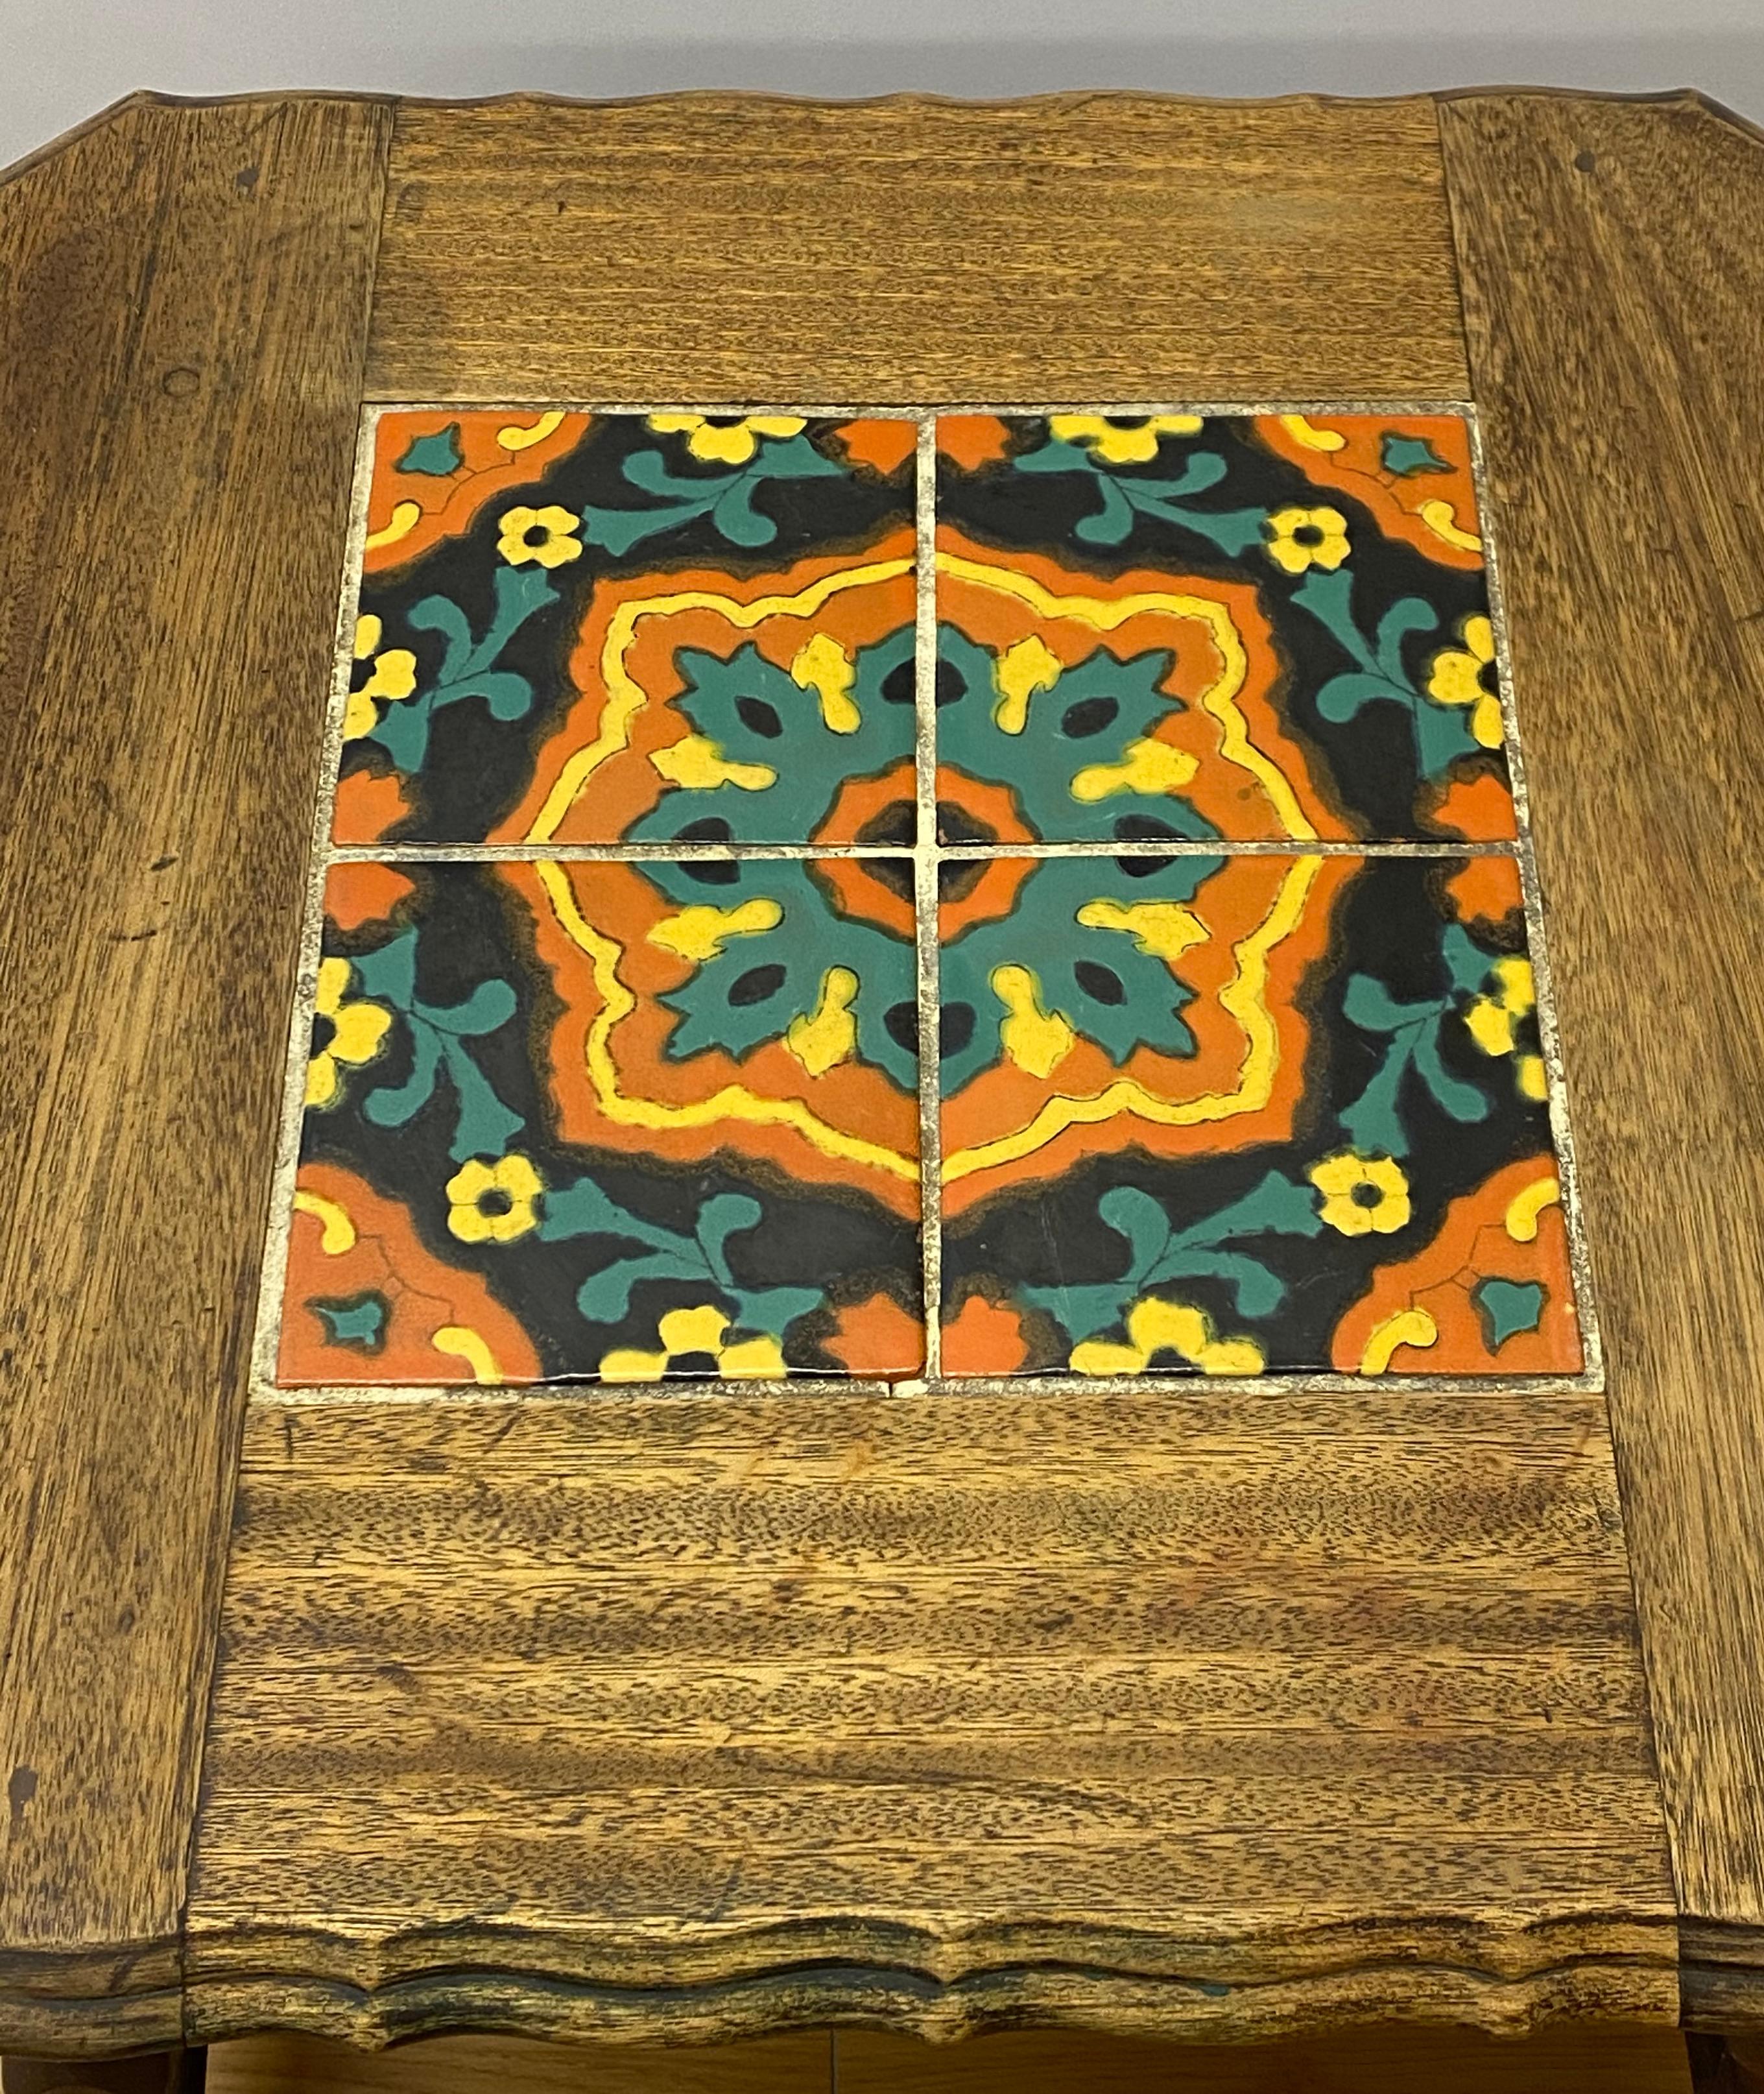 Mission oak Arts & Crafts tile-top side table, circa 1920.

Scalloped edge with glazed tile top

Dimensions: 22